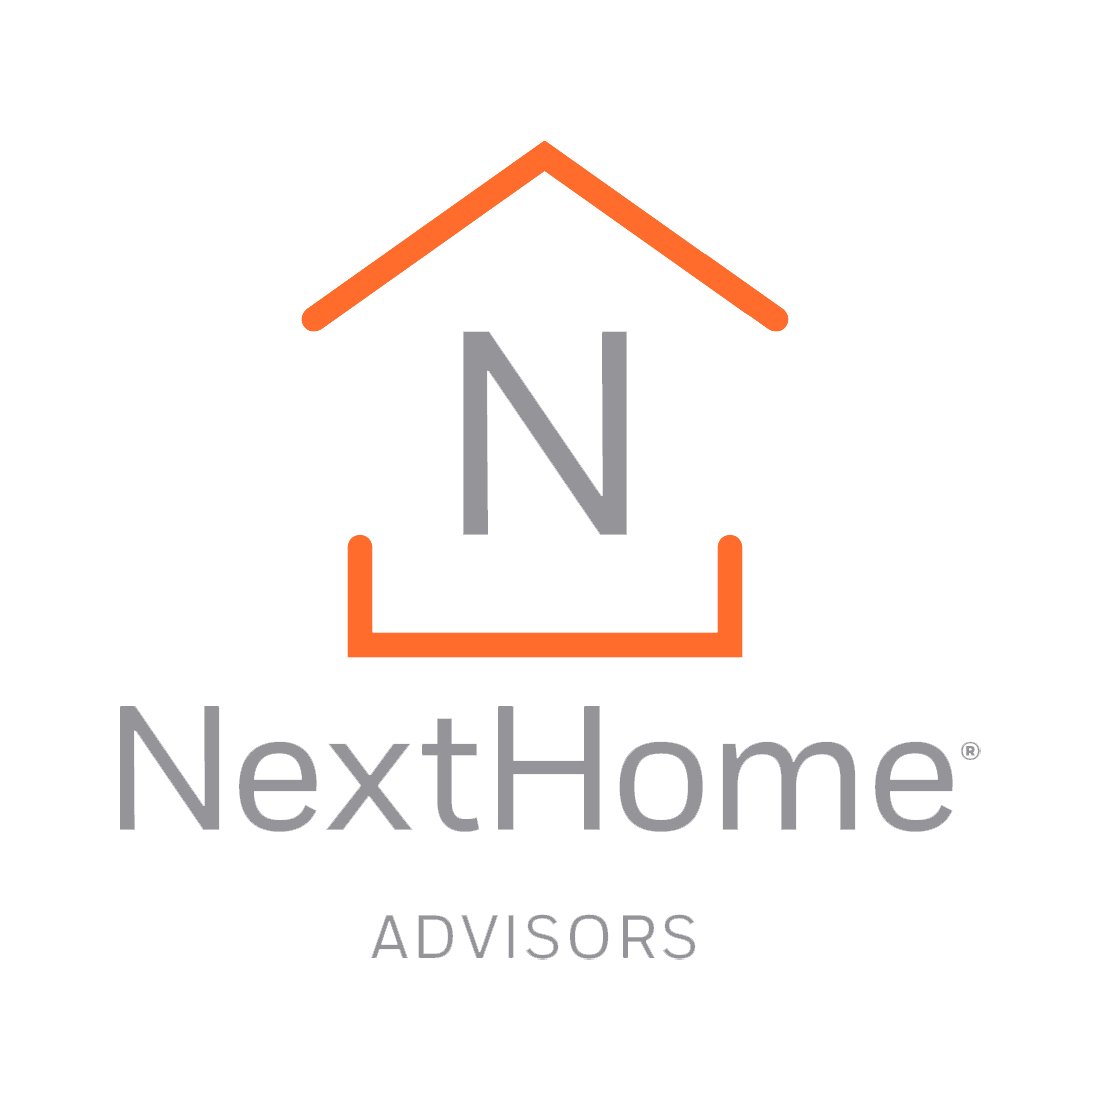 Since 2002, I’ve worked with NextHome Advisors to represent the buyers and sellers of the Florida Gulf Coast.